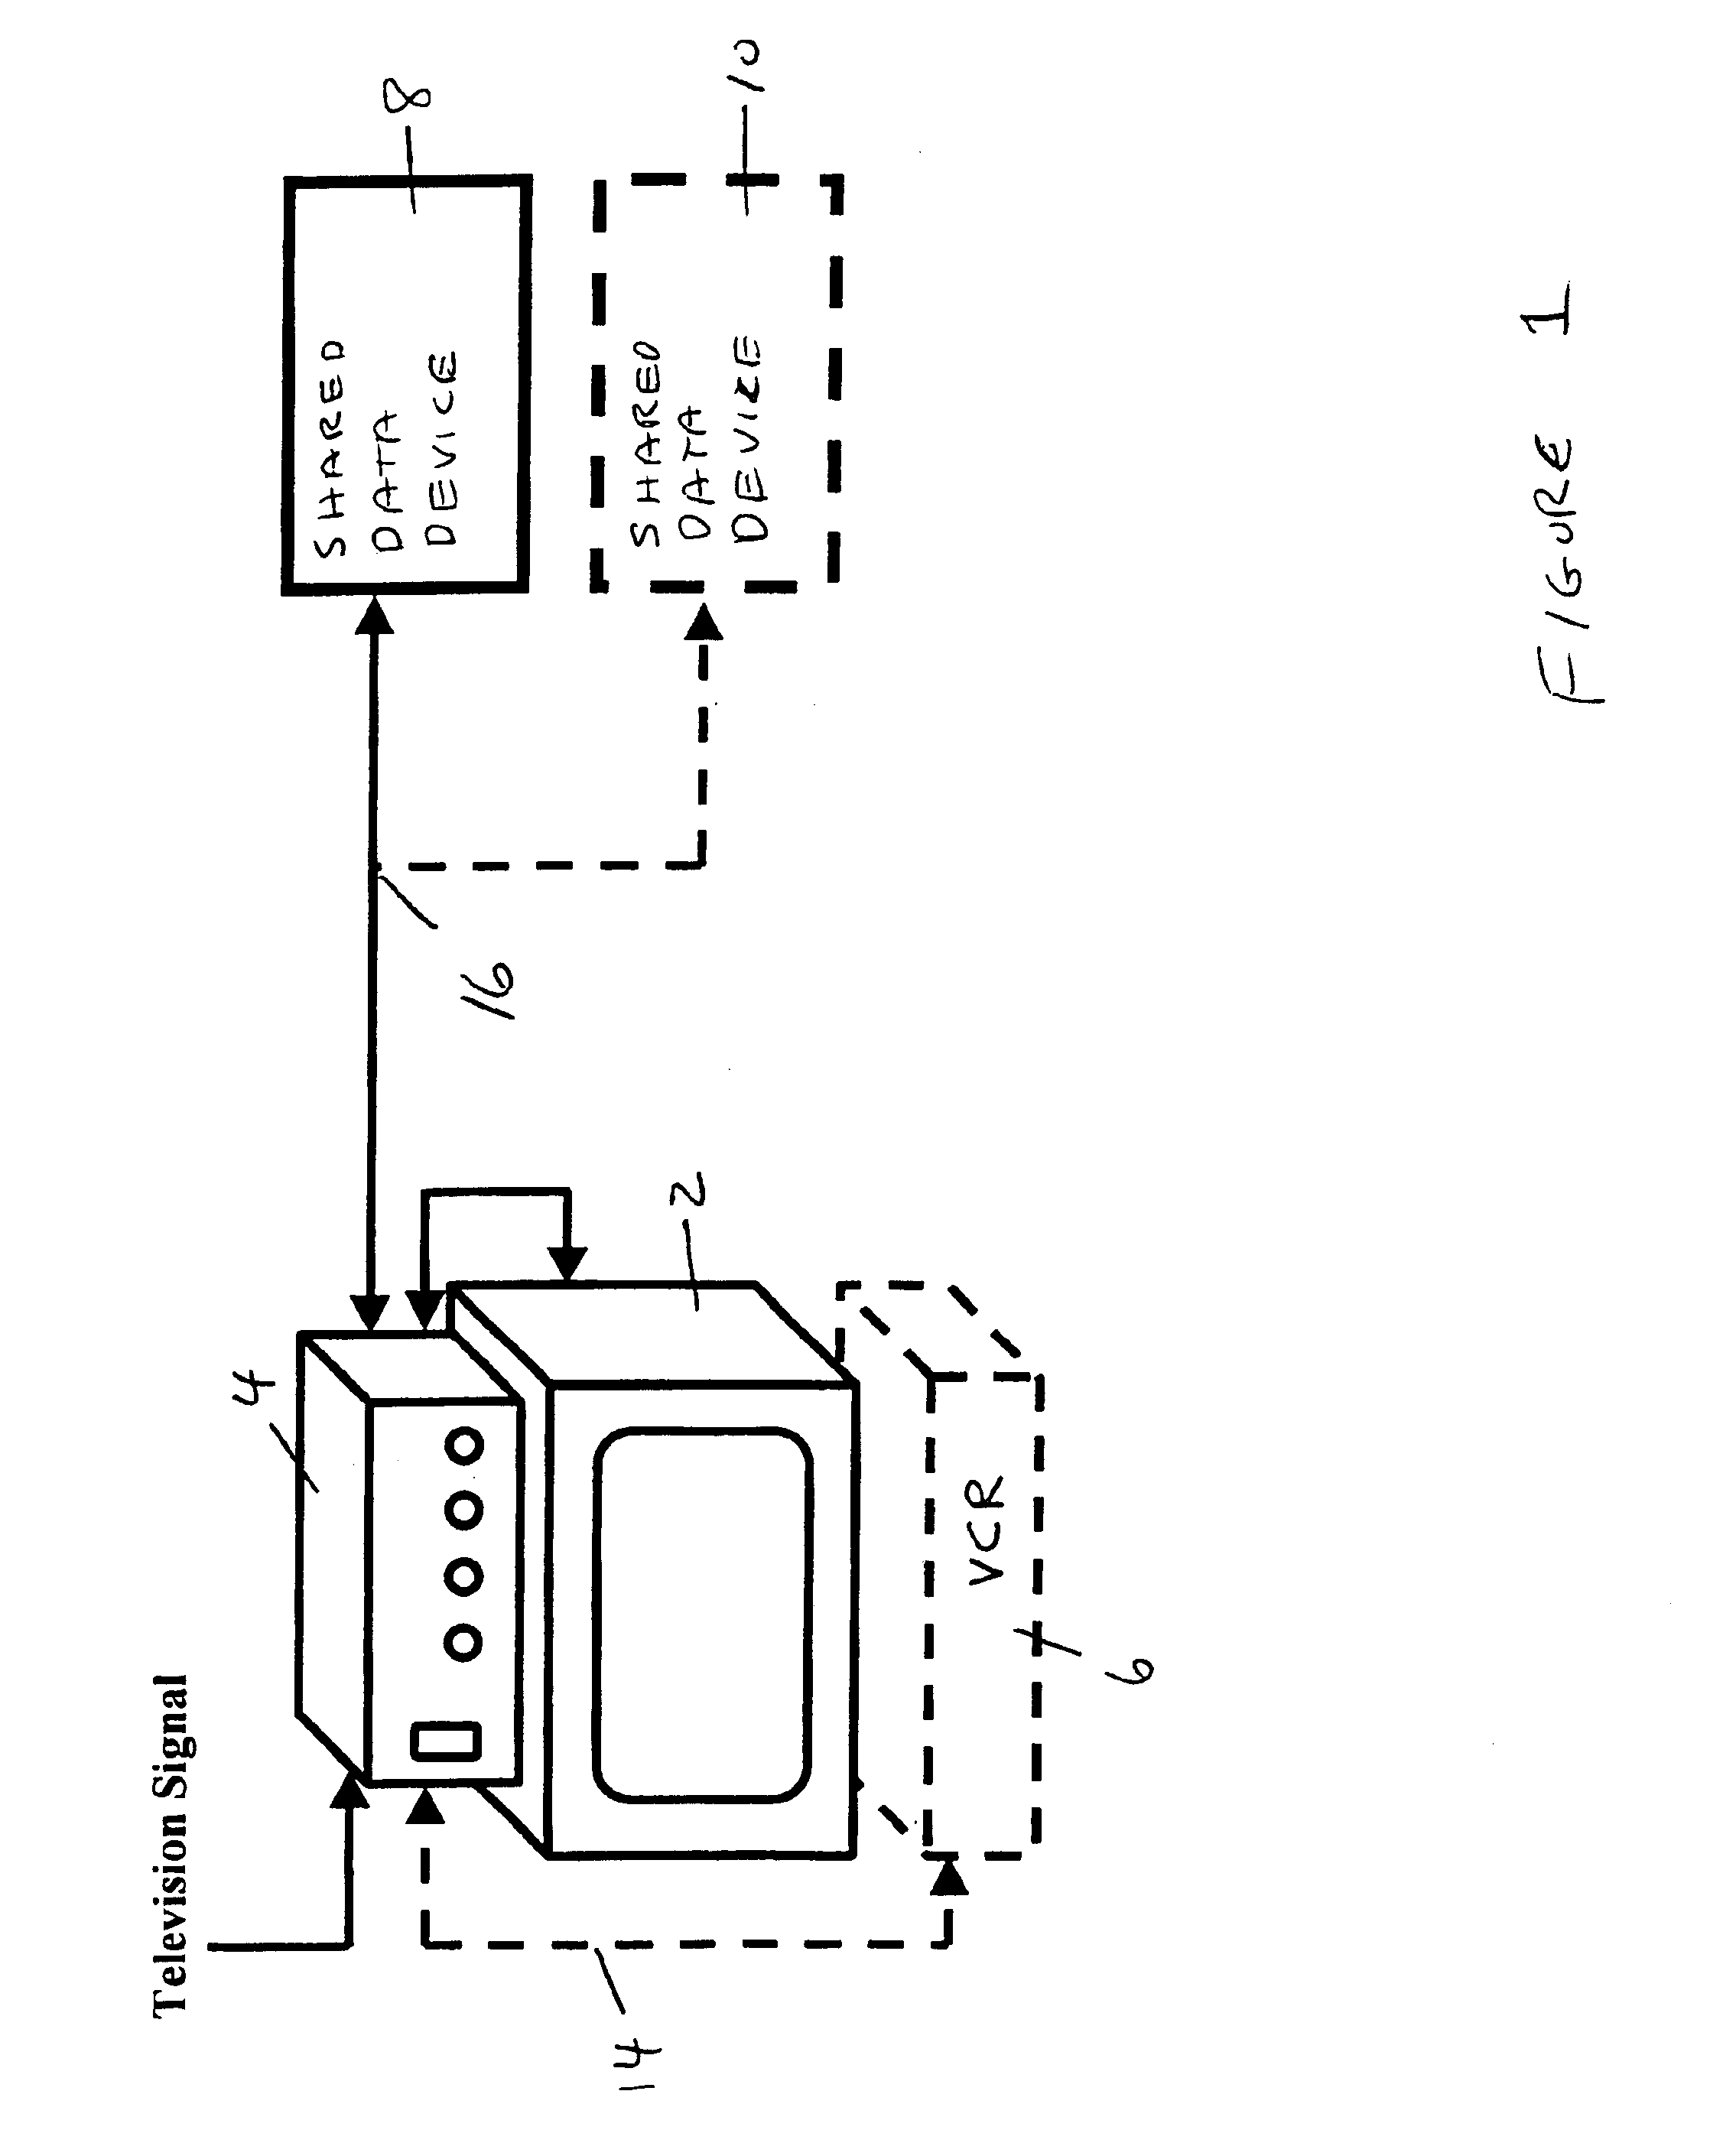 Television receiver with shared data port and control software